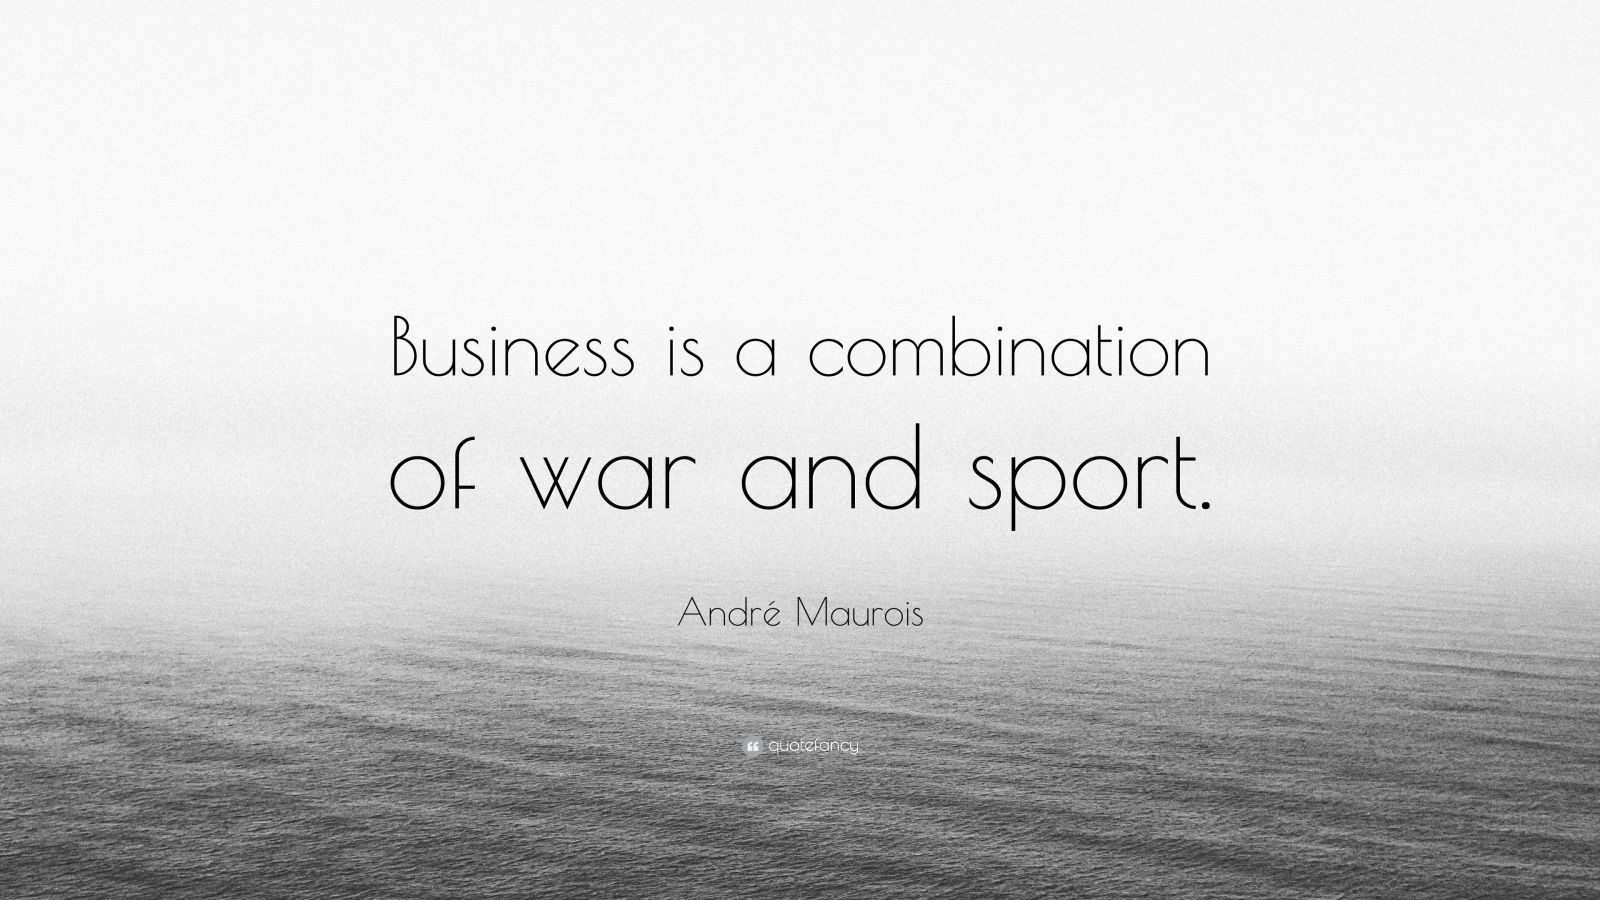 André Maurois Quote: “Business is a combination of war and sport.” (9 ...